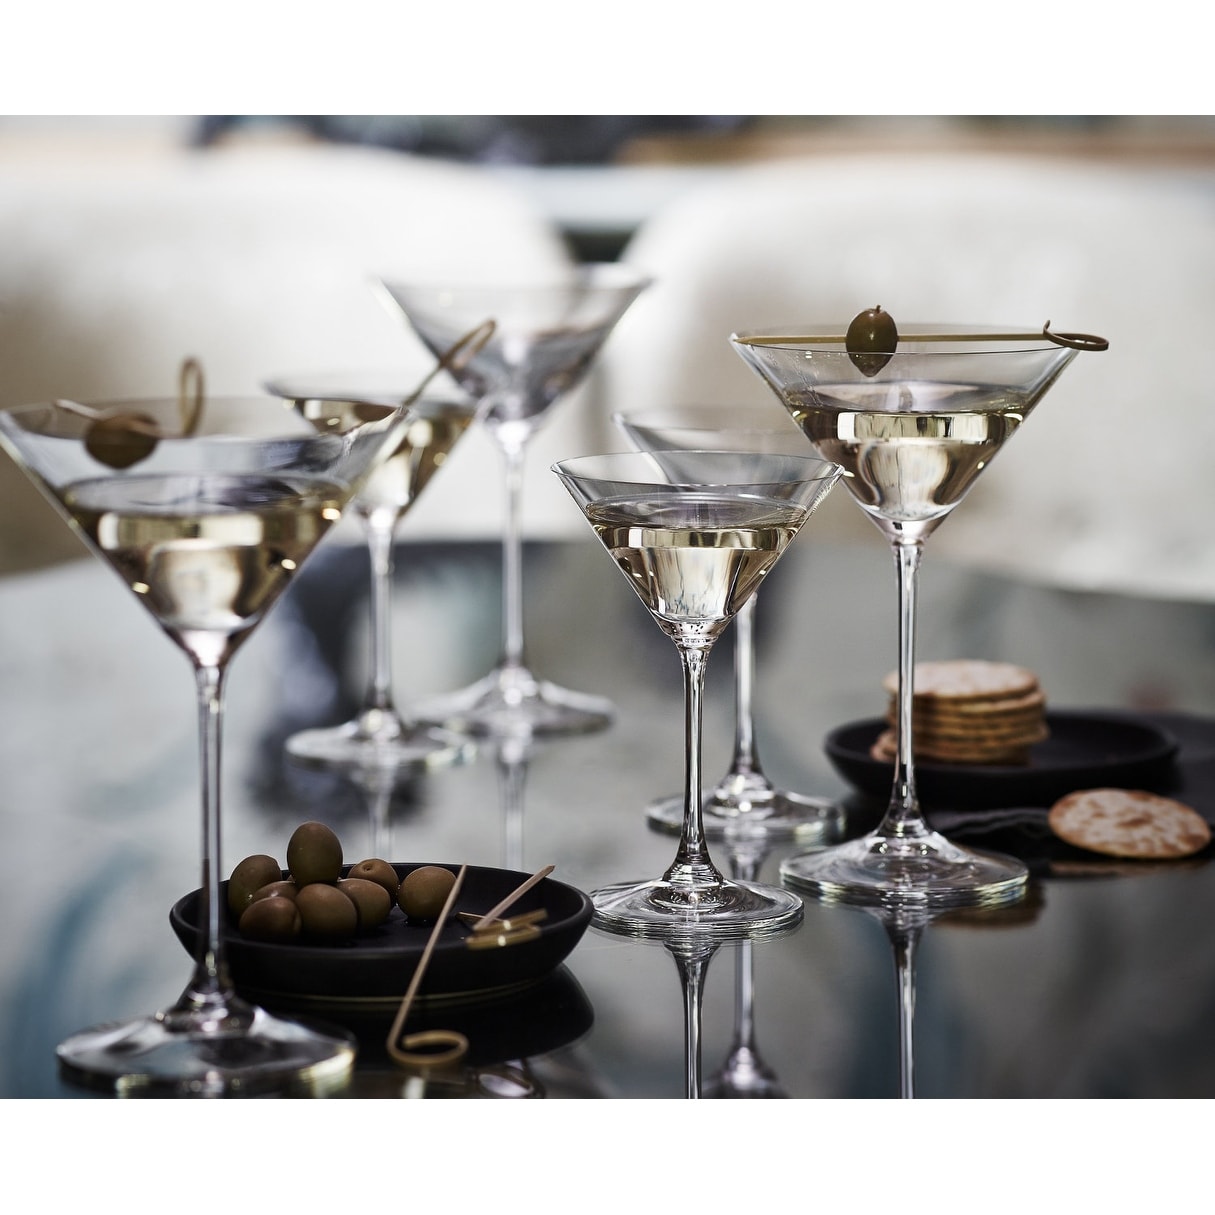 https://ak1.ostkcdn.com/images/products/is/images/direct/2003c01107e267cb95225acd7d388f533df419c4/Riedel-Vinum-Martini-Glasses-%28Set-of-4%29-with-Pourer-%26-Polishing-Cloth.jpg